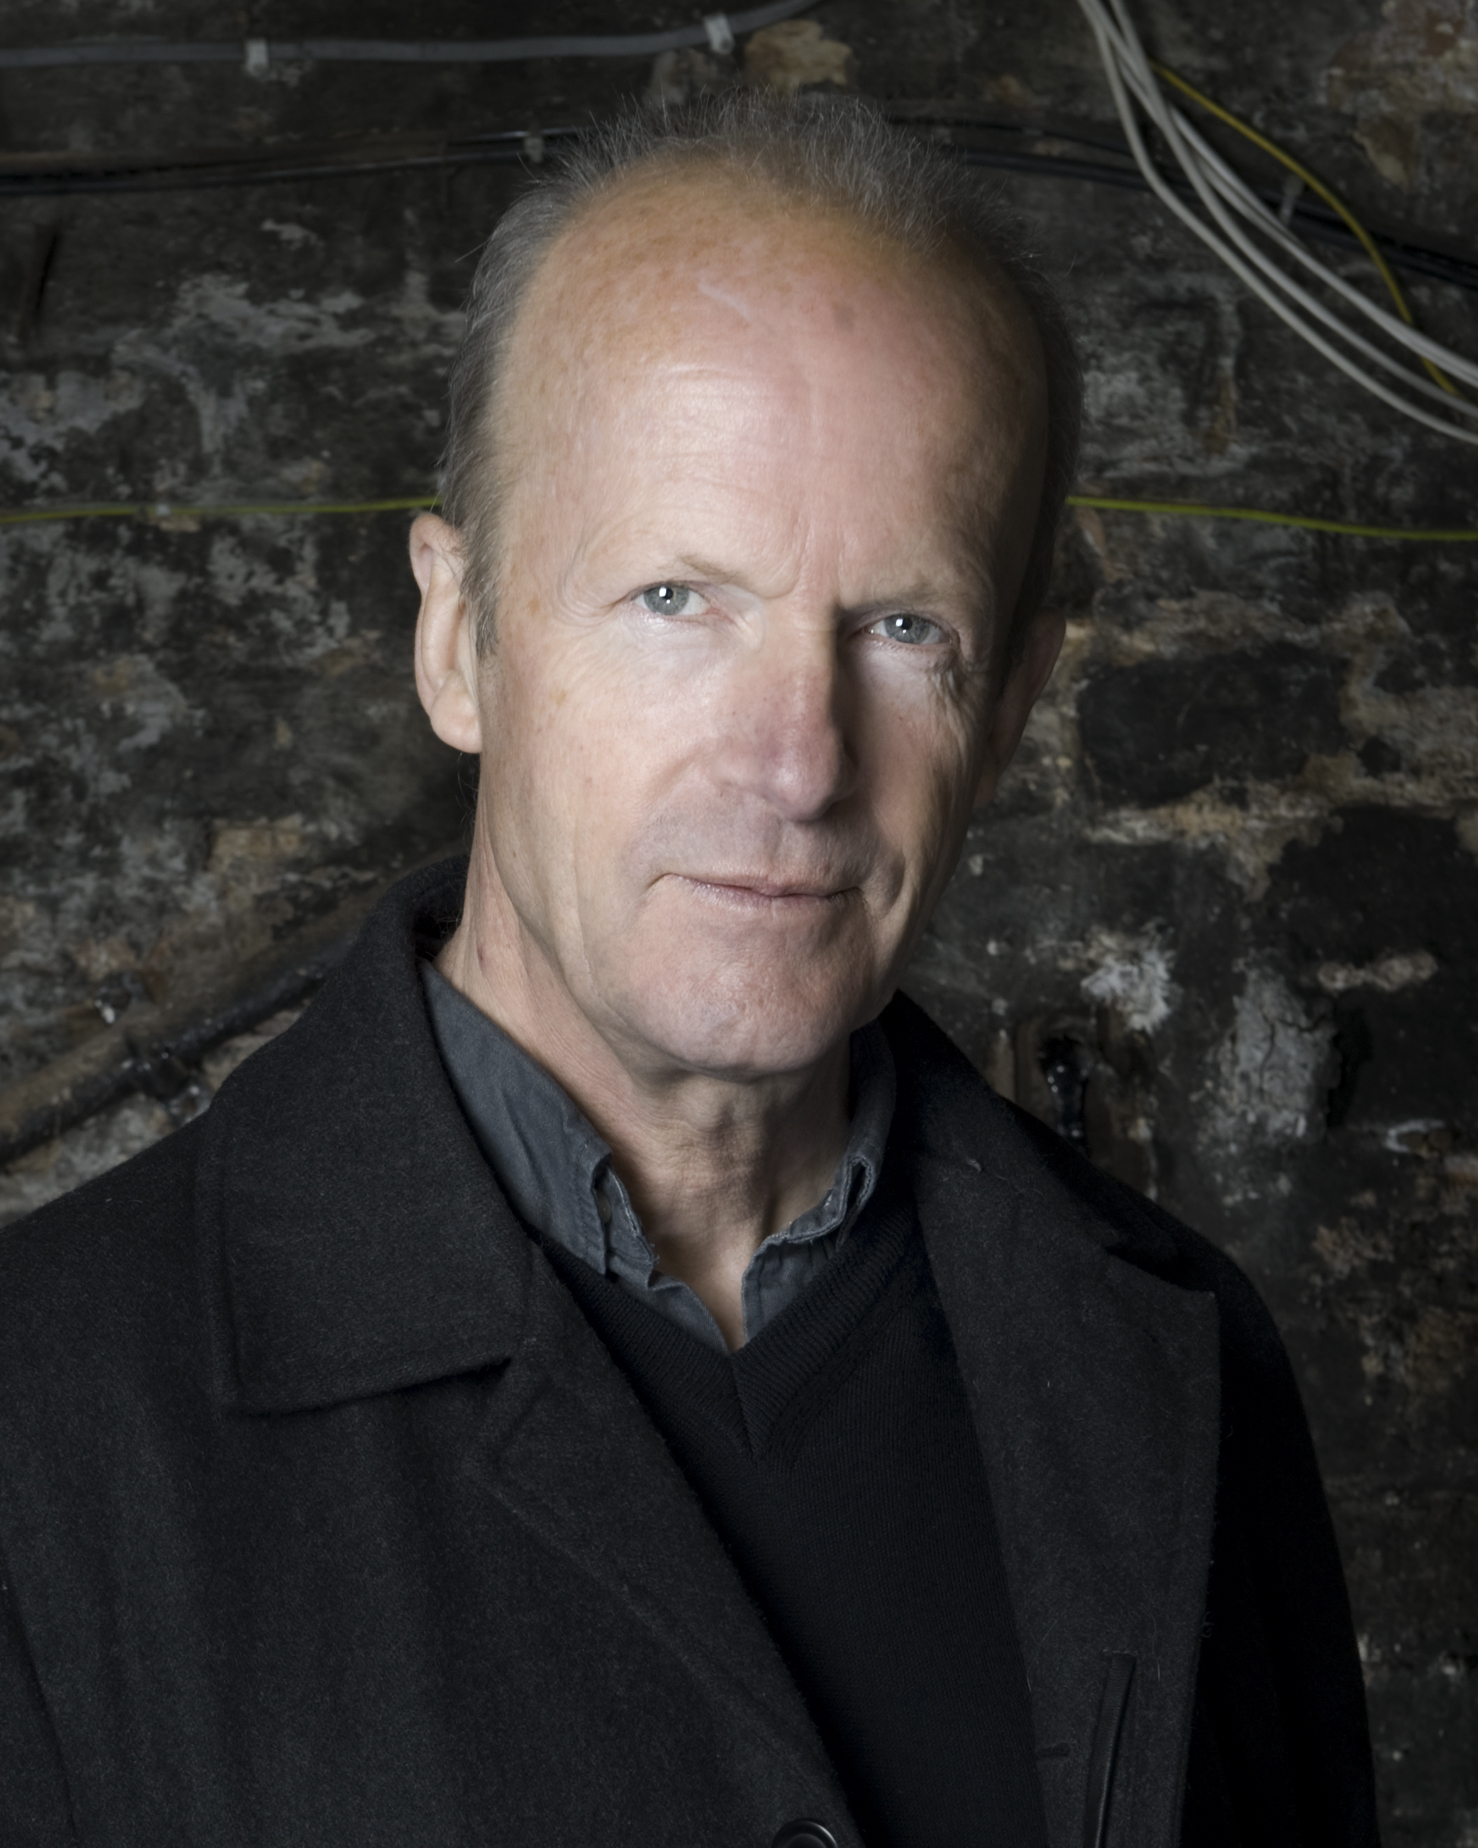 Congrats to Jim Crace, winner of the James Tait Black Prize